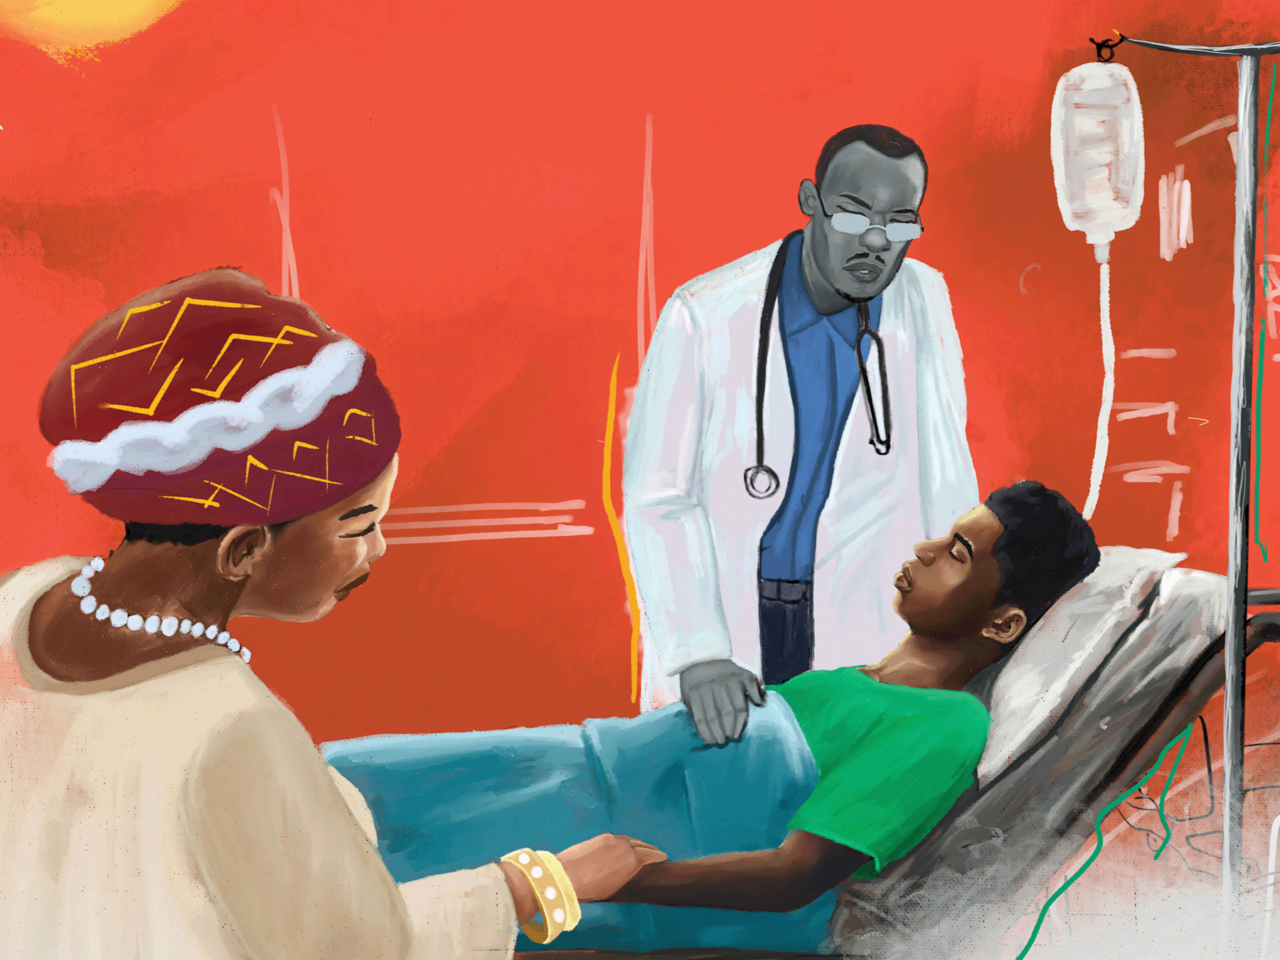 Christian Ntizimira: Dying in Community: Being Present in the Hour of Death